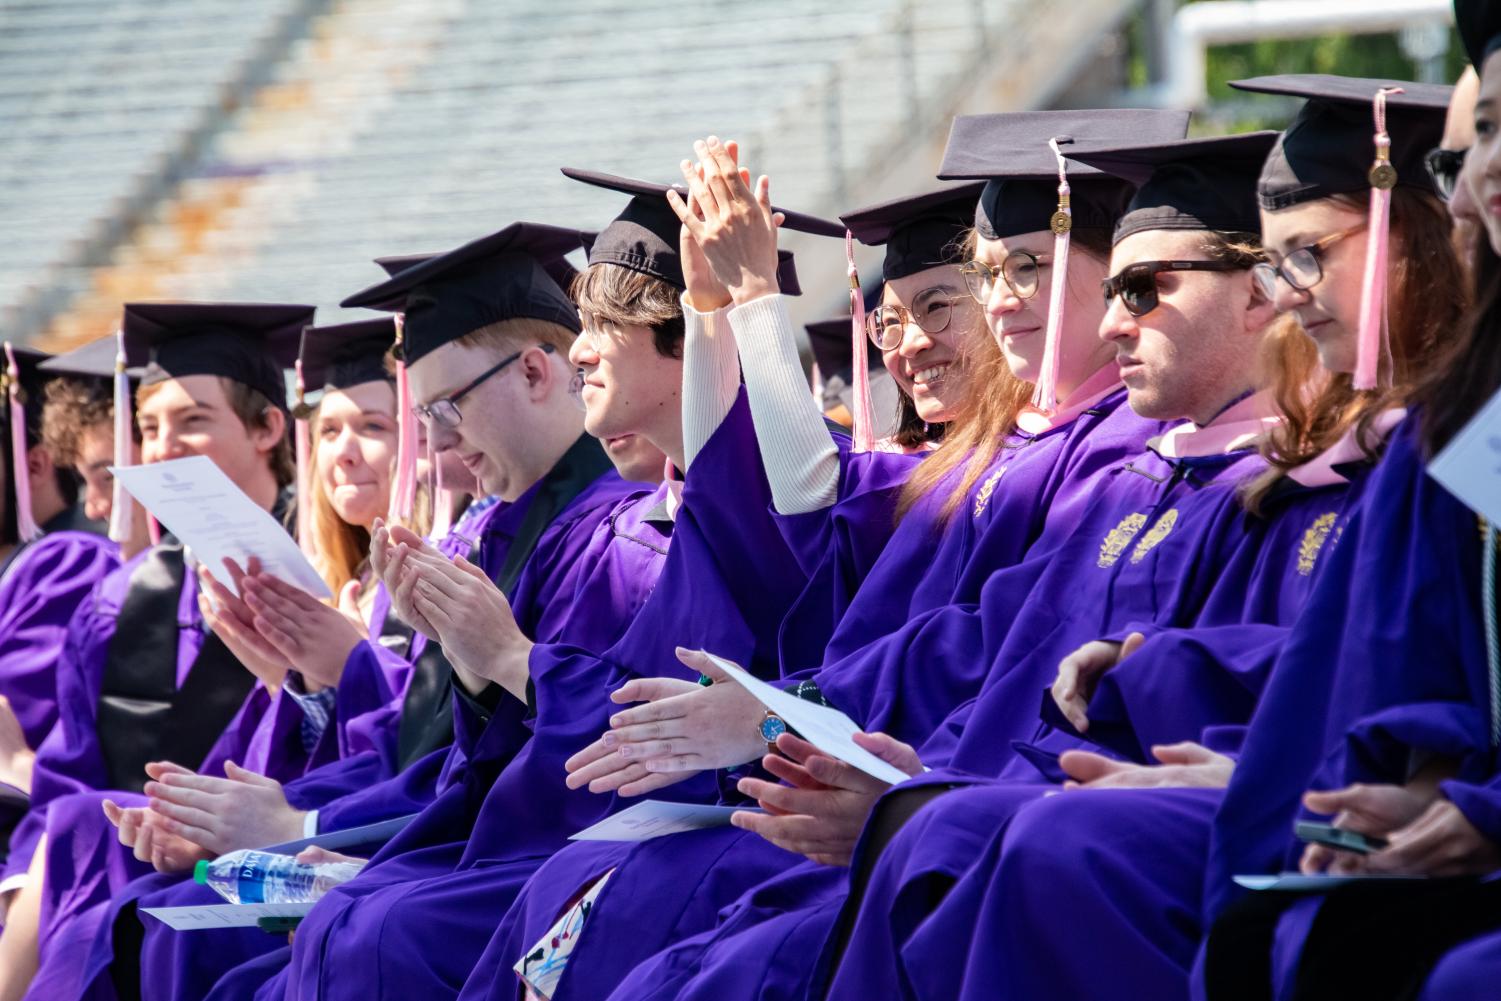 Students in purple robes clap.